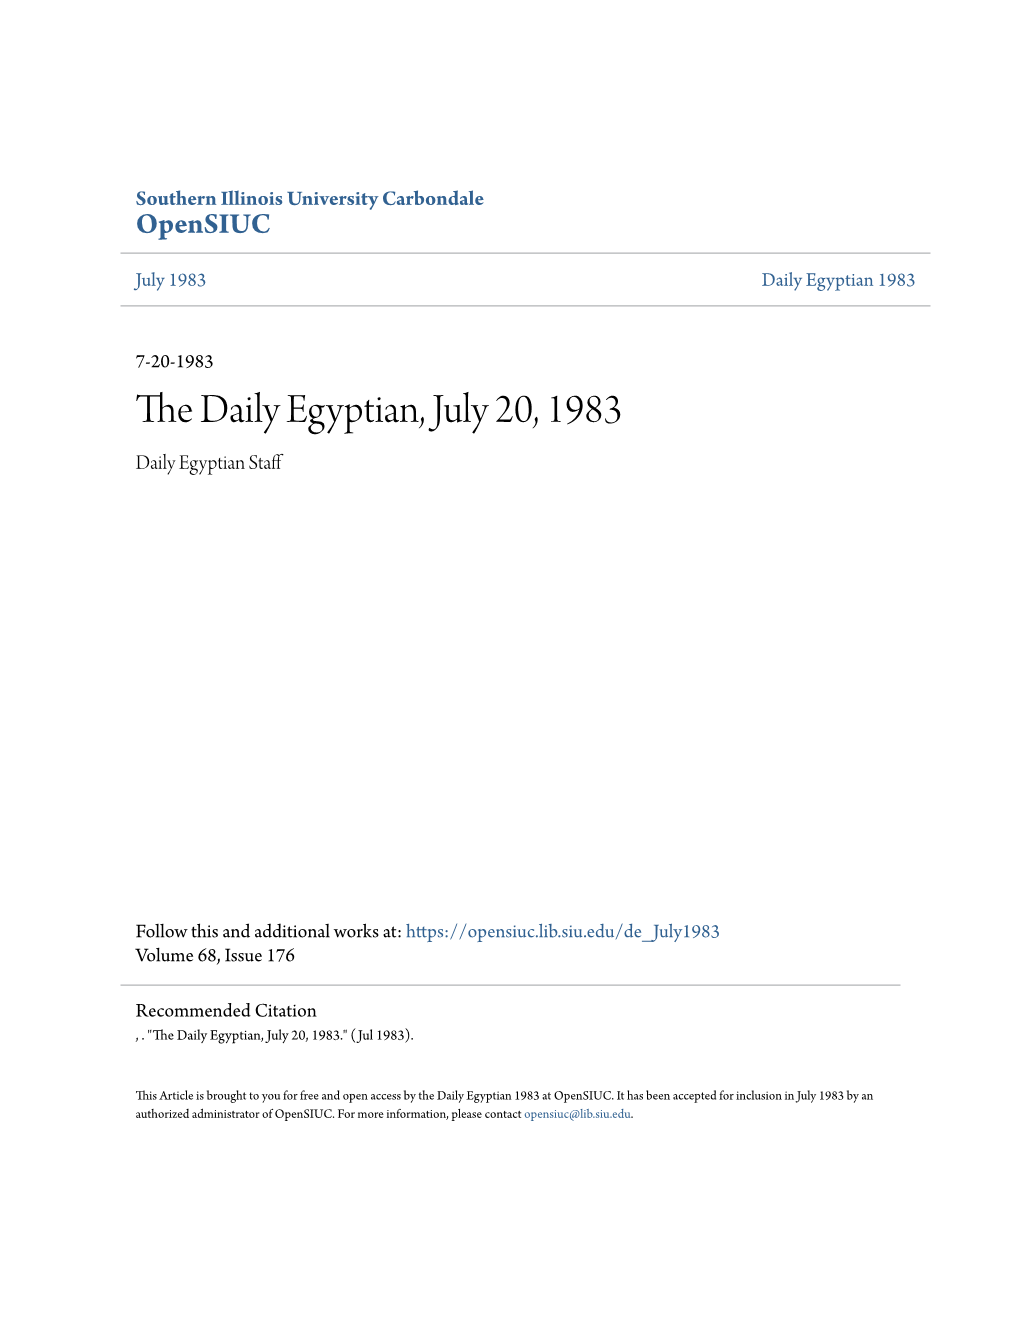 The Daily Egyptian, July 20, 1983